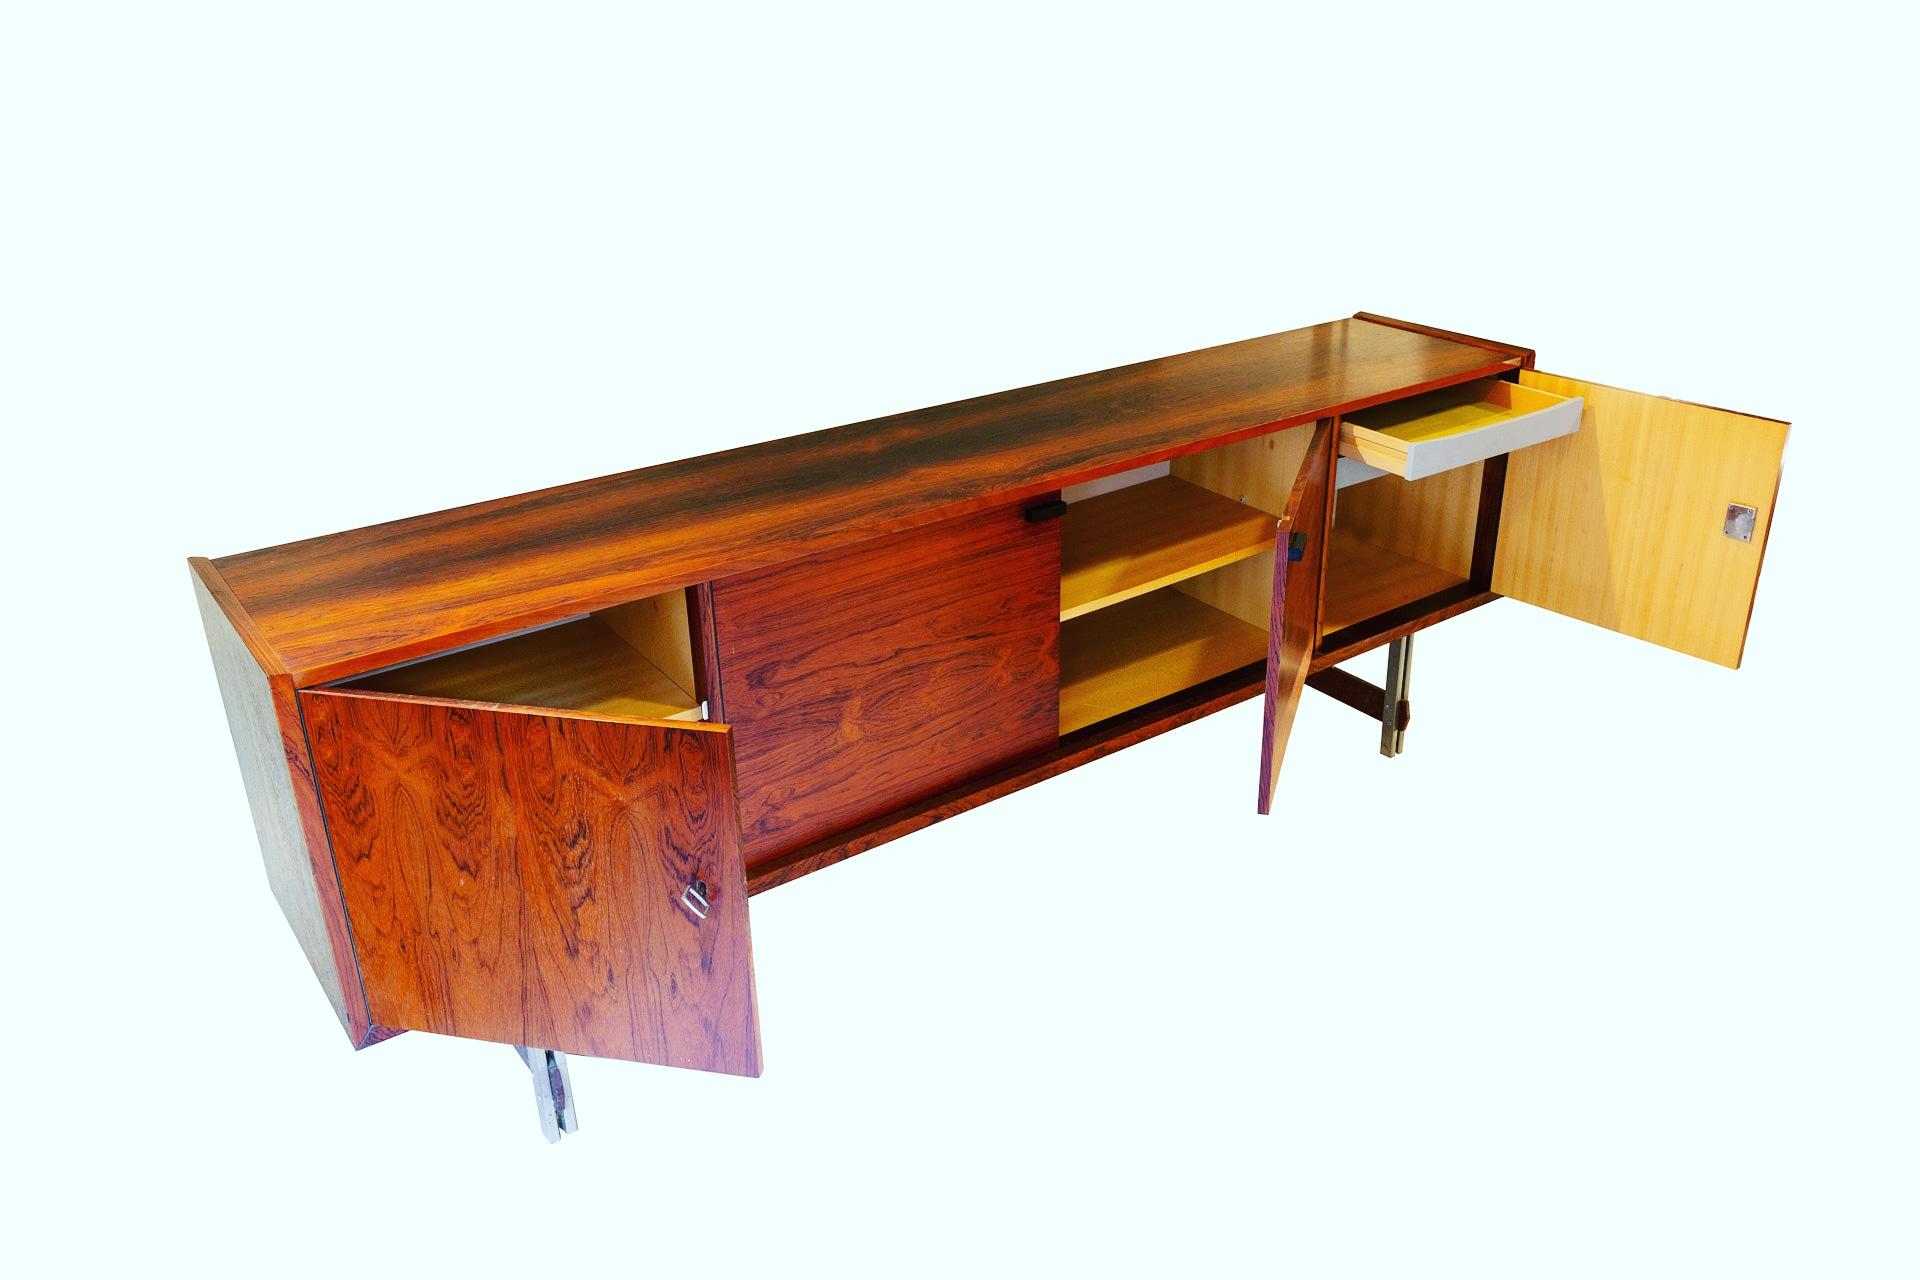  Ico Parisi Side-board Mid-Century Modern, Italy, 1950-1960.
This a spectacular forme and wodd quality , Rosewood and Acero 